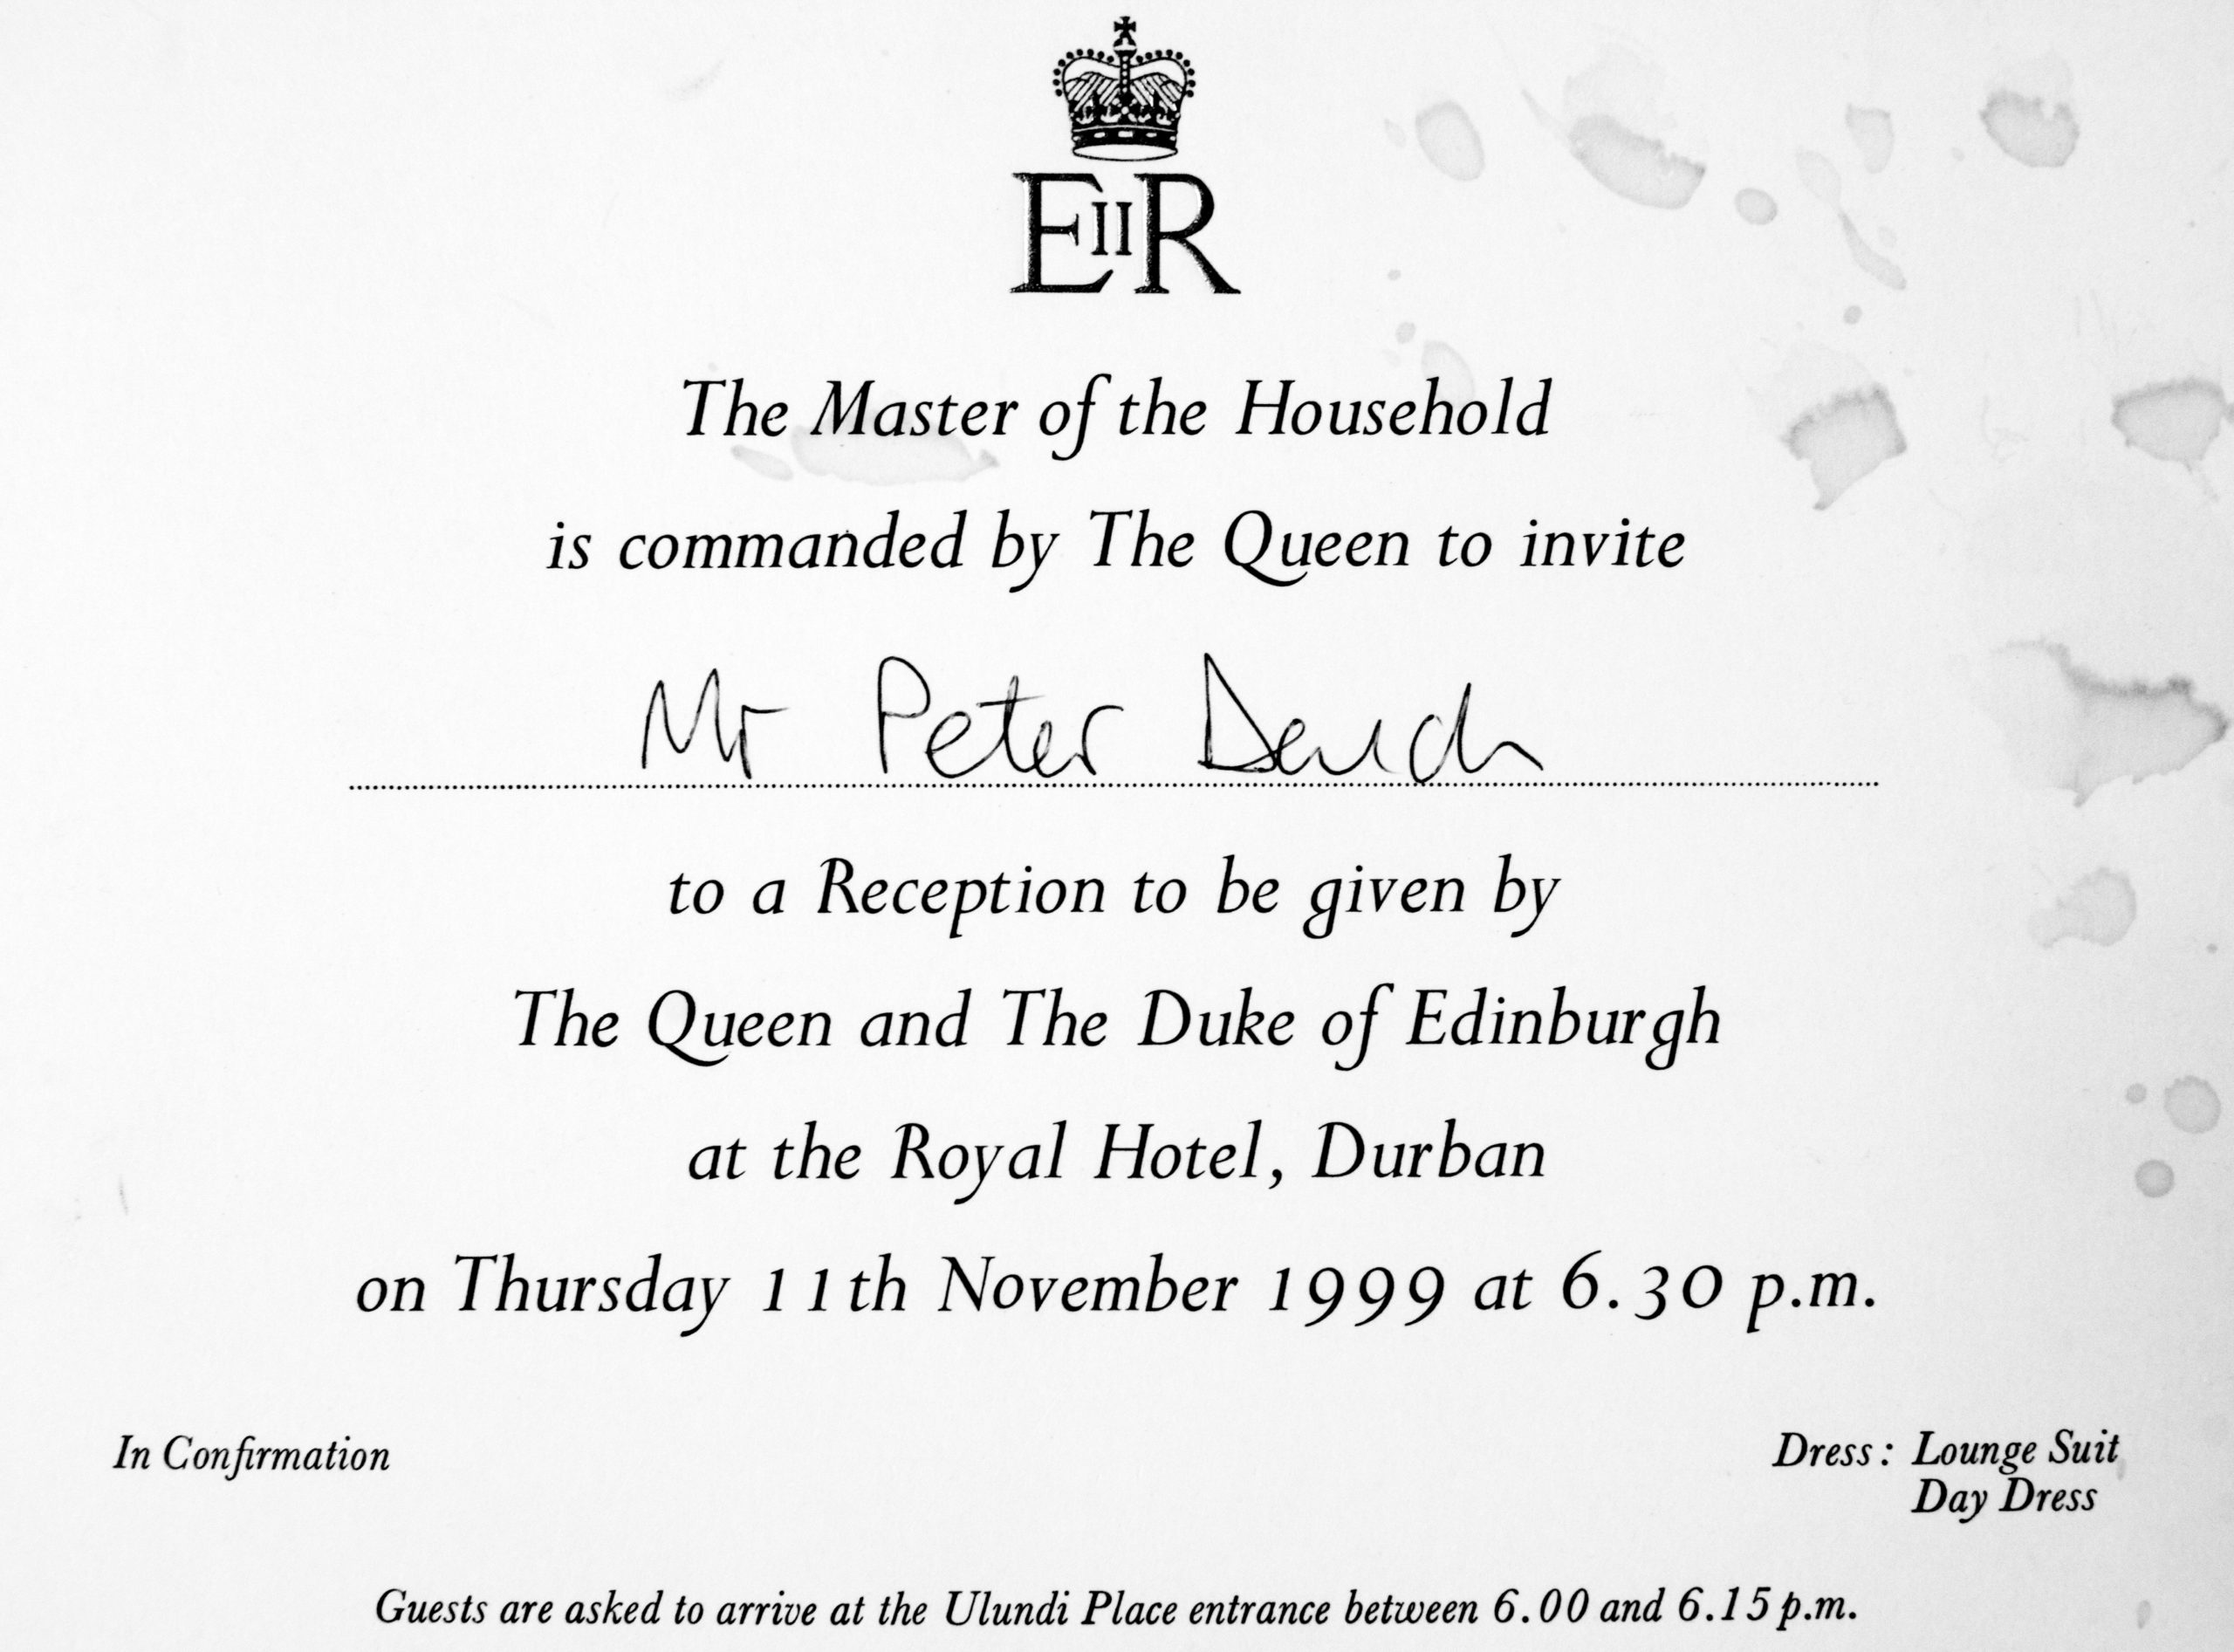 Peter Dench’s invite to the reception at the Royal Hotel, Durban, South Africa, on 11 November 1999. © Peter Dench.